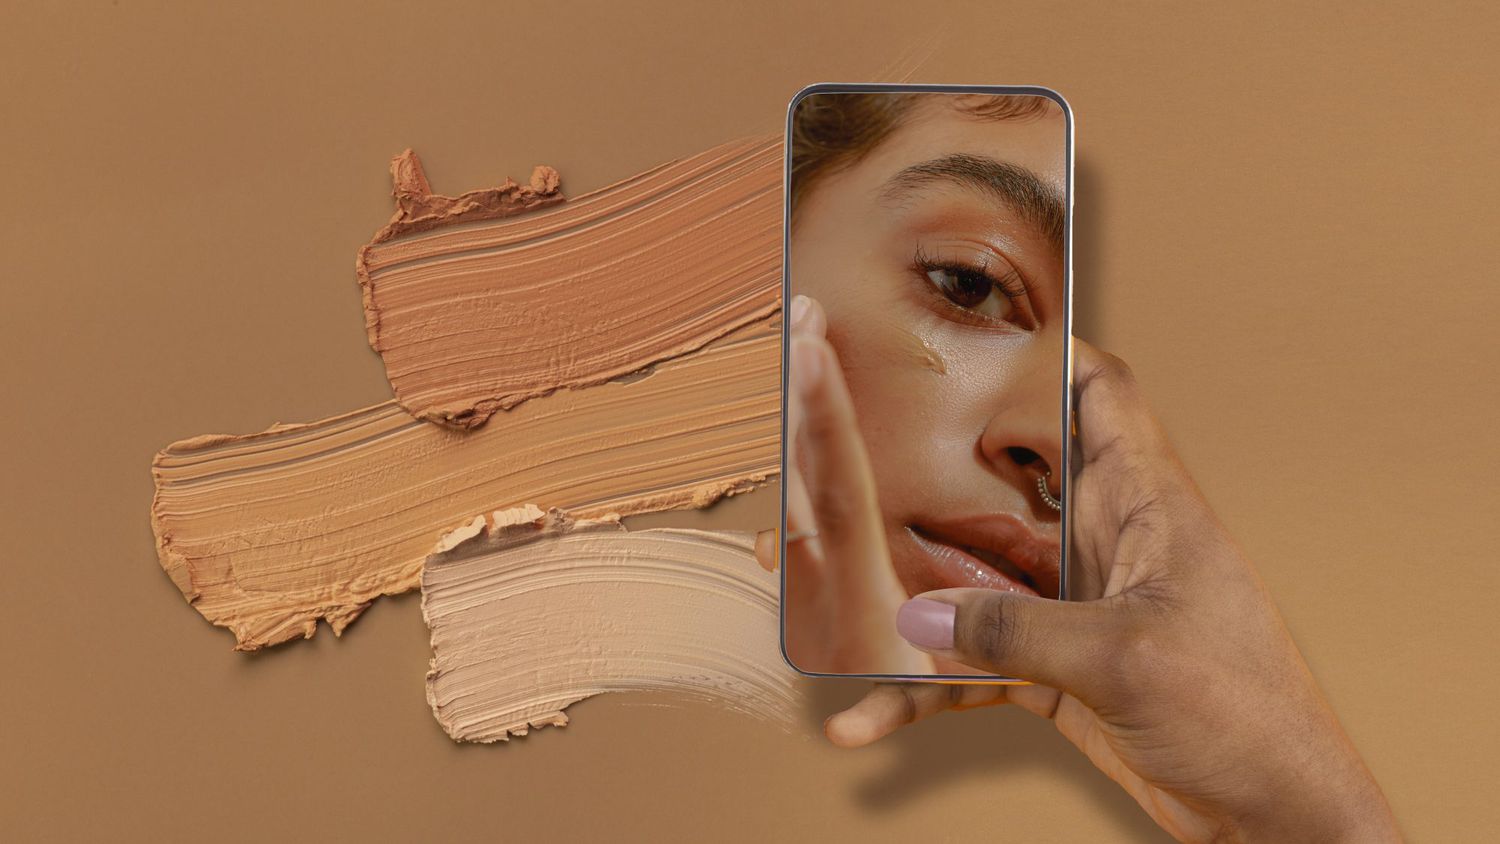 How to Match Foundation to Skin Tone